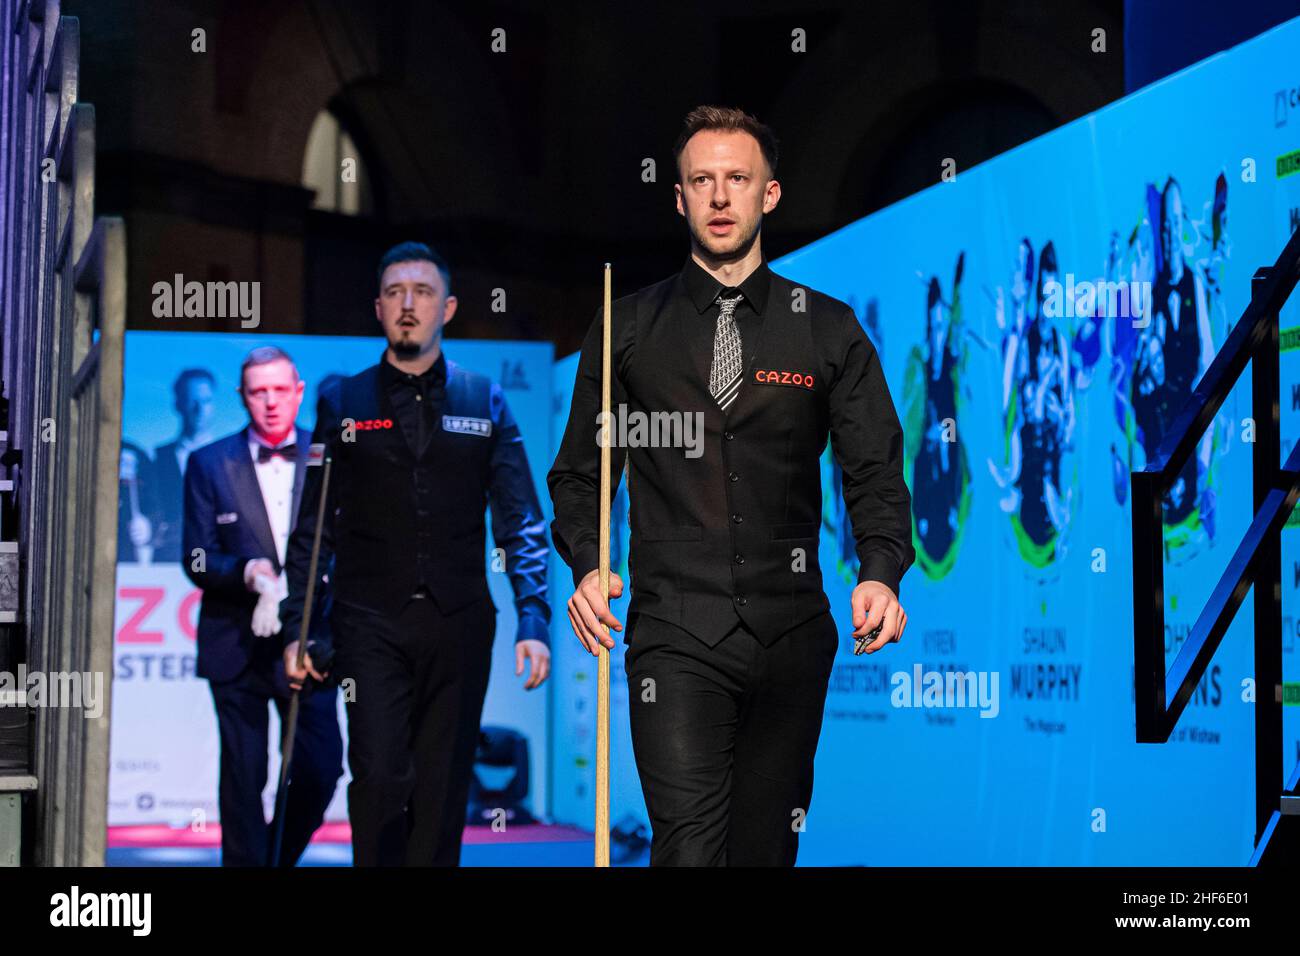 London, UK. 14th Jan, 2022. Judd Trump v Kyren Wilson on Day 6 matches during the 2022 Cazoo Master at Alexandra Palace on Friday, January 14, 2022 in LONDON ENGLAND. Credit: Taka G Wu/Alamy Live News Stock Photo